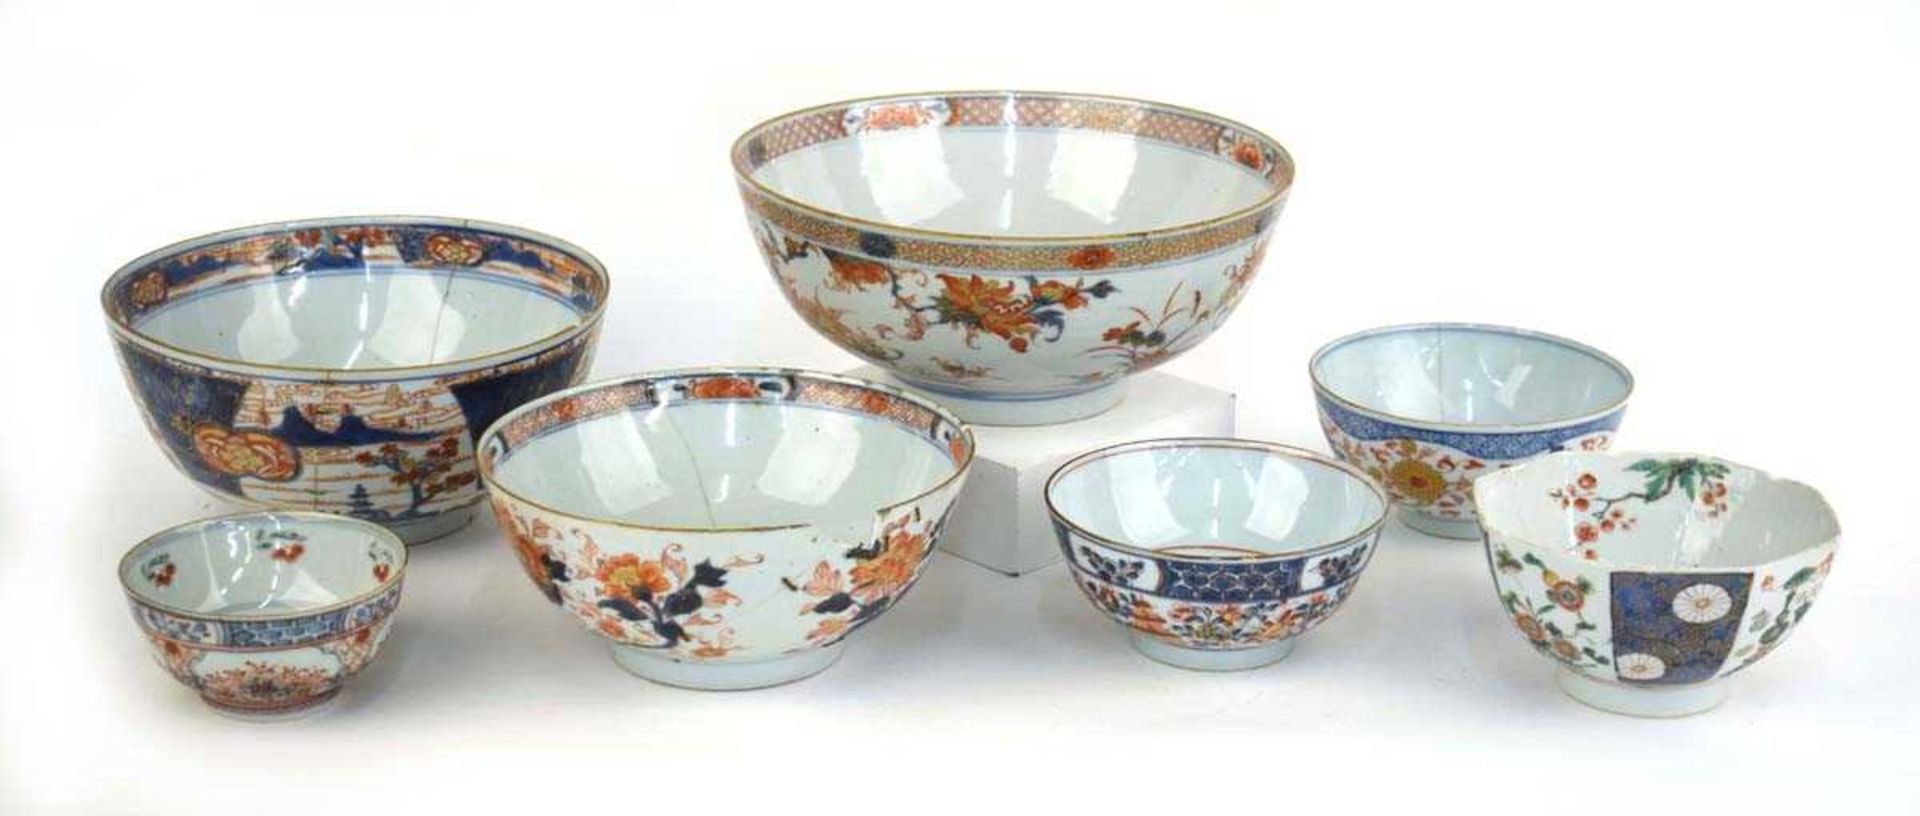 A Chinese bowl centrally decorated with a vase of flowers in the Imari palette, d. 25.5 cm, together